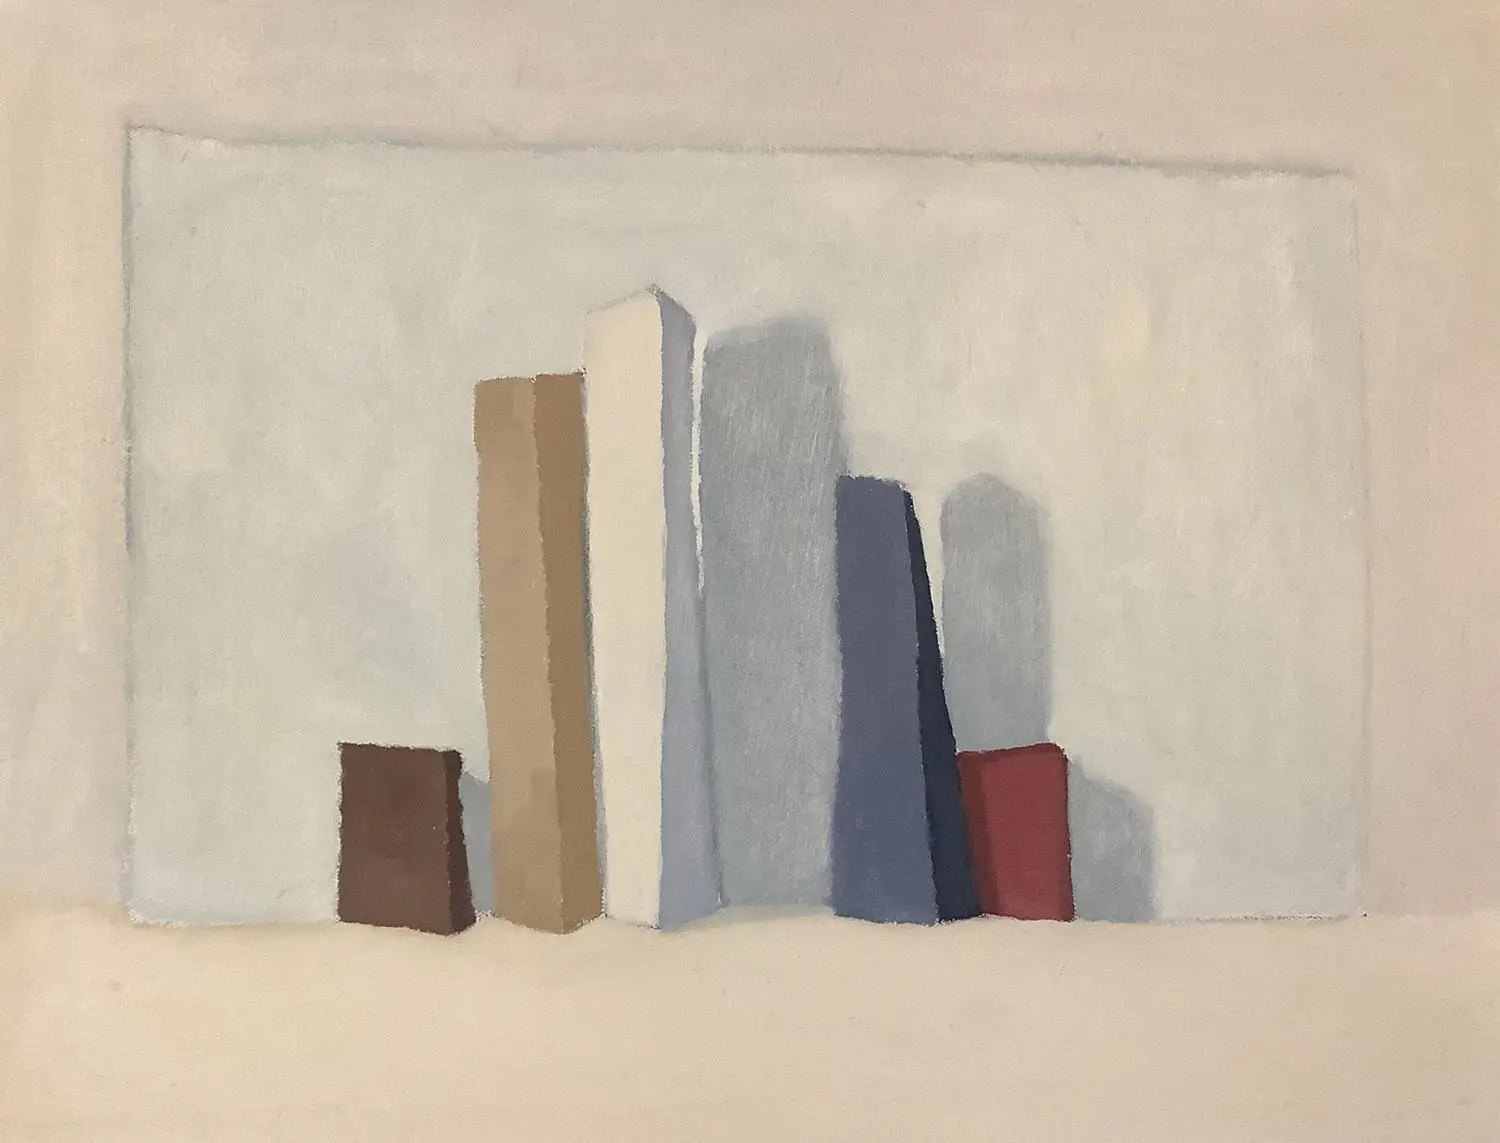 a painting of five blocks of various sizes in brown, white, blue and red